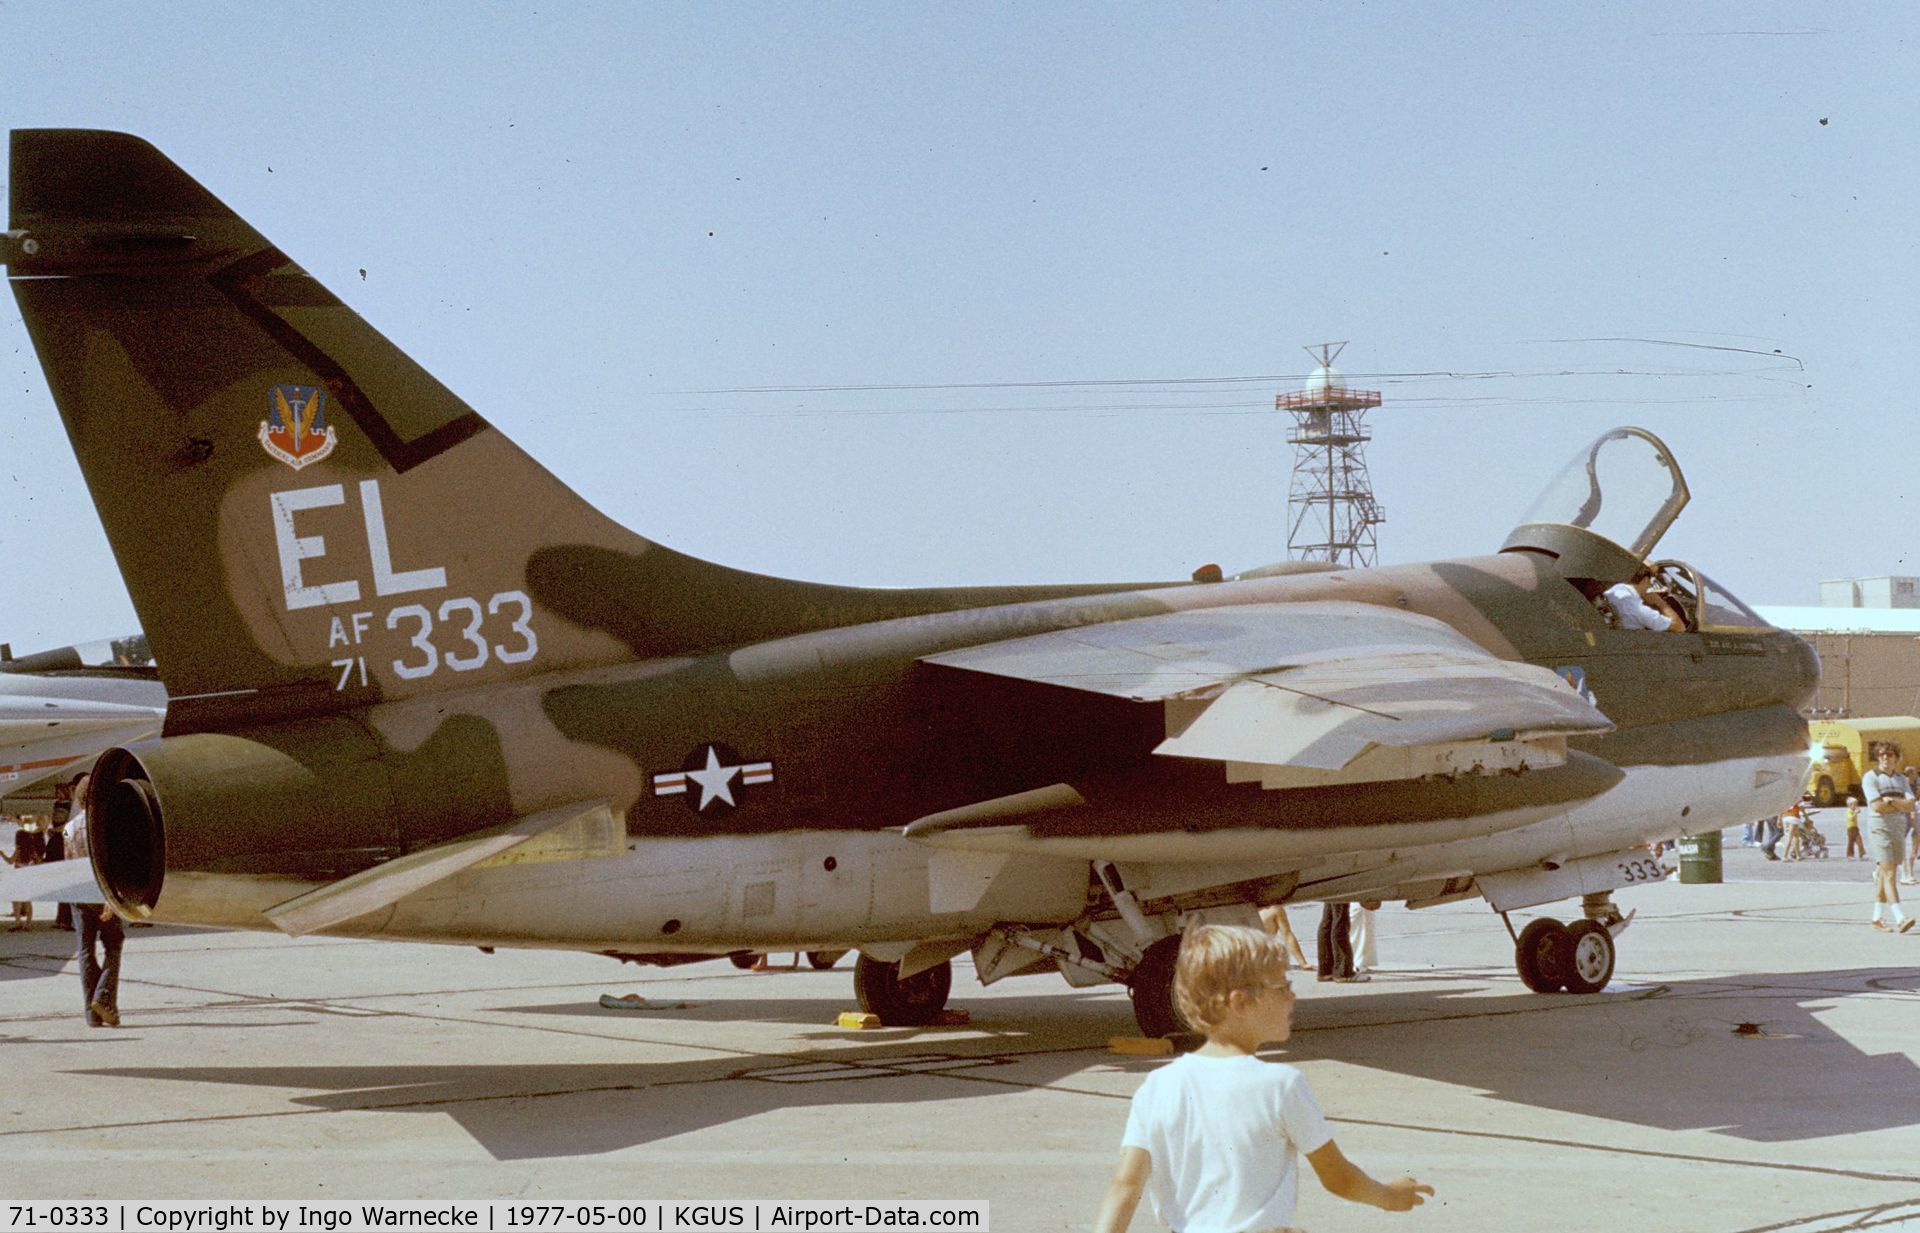 71-0333, 1971 LTV A-7D Corsair II C/N D-244, LTV A-7D Corsair II of the USAF at the 1977 airshow at Grissom AFB, Peru IN